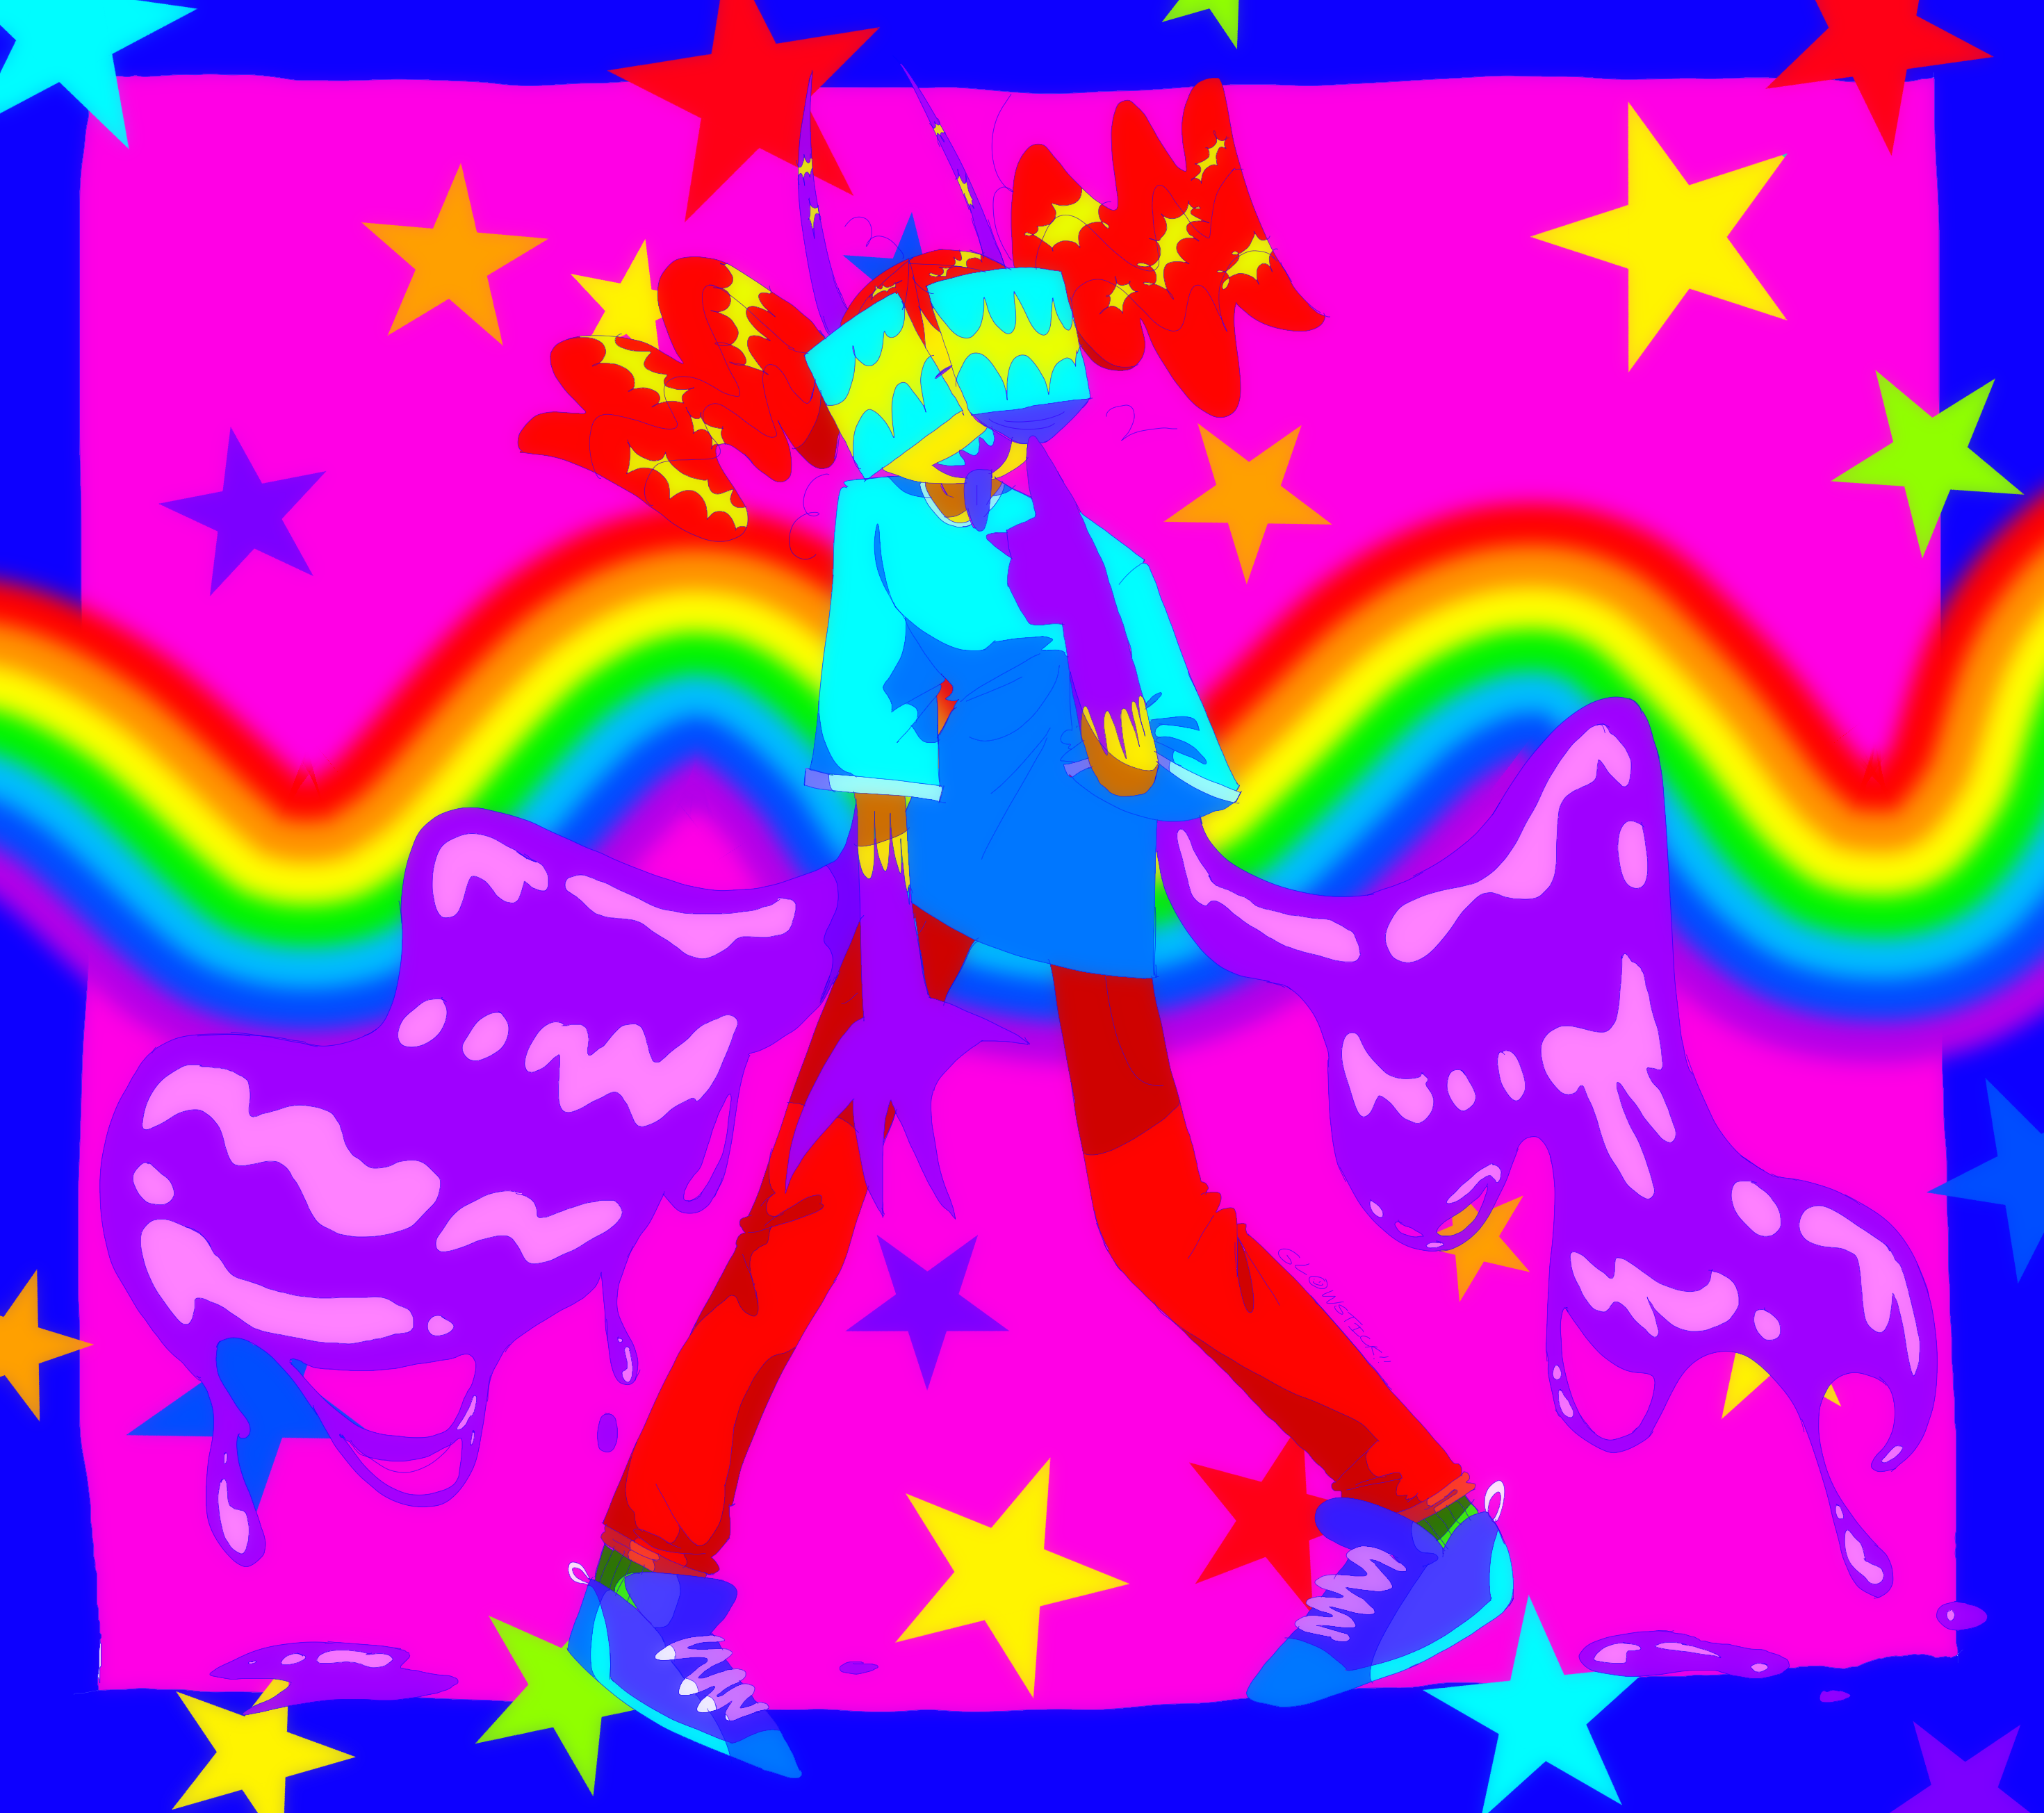 A brightly colored drawing of a character with bright yellow skin, red hair, a cyan shirt, and red pants. They have two purple goopy wings, and the background is decorated with a blurred wiggly rainbow.